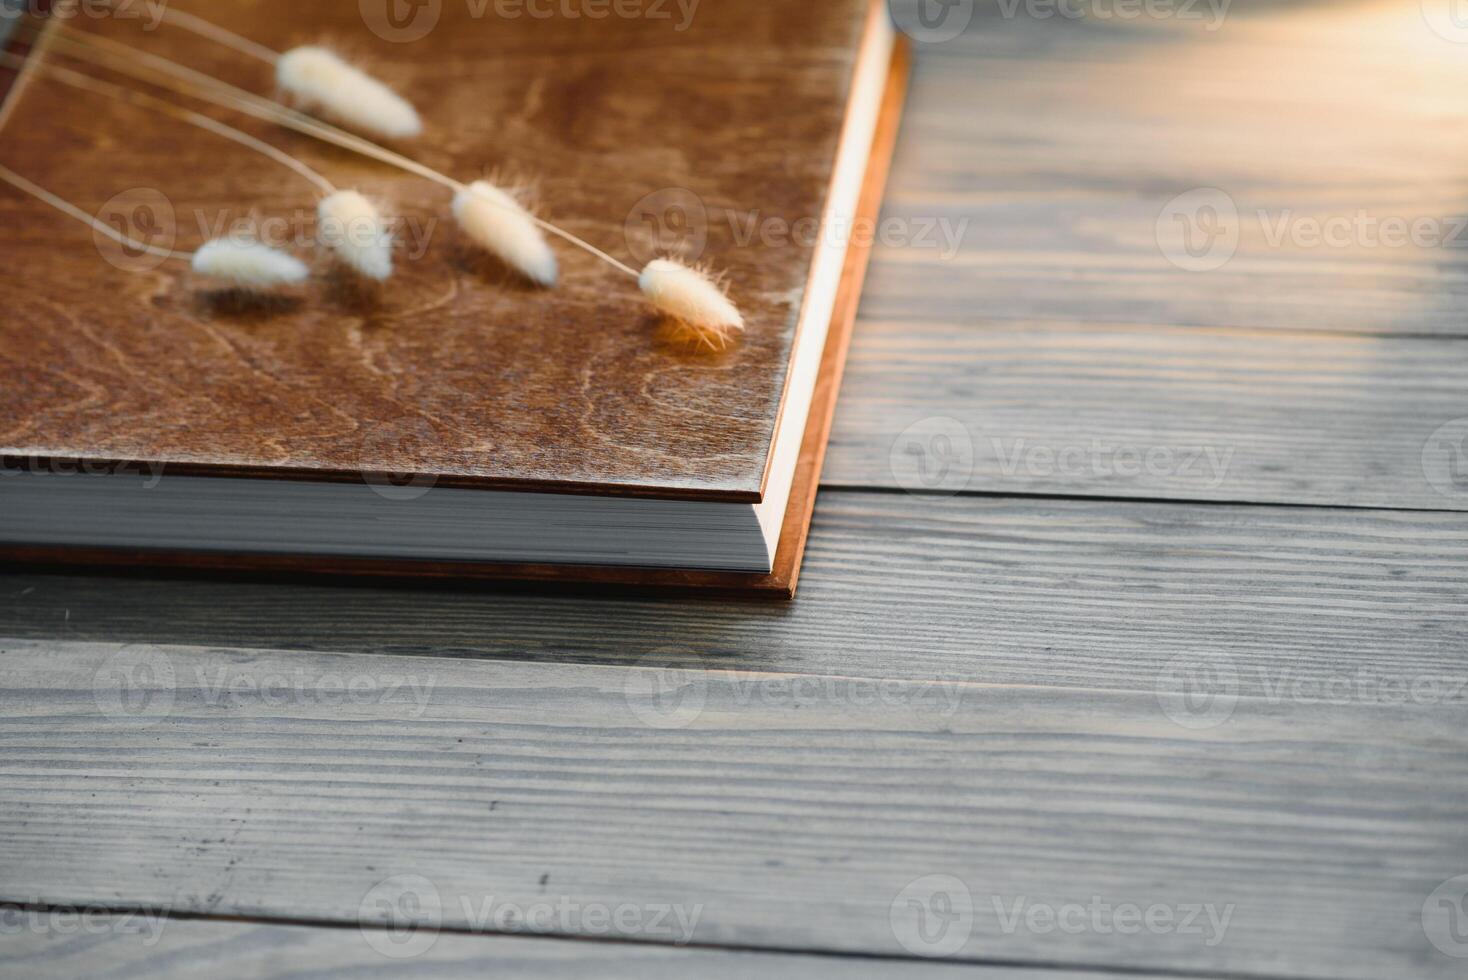 premium photo book, large size, natural wood cover, wedding photo book, family photo book, thick sheets, quality binding